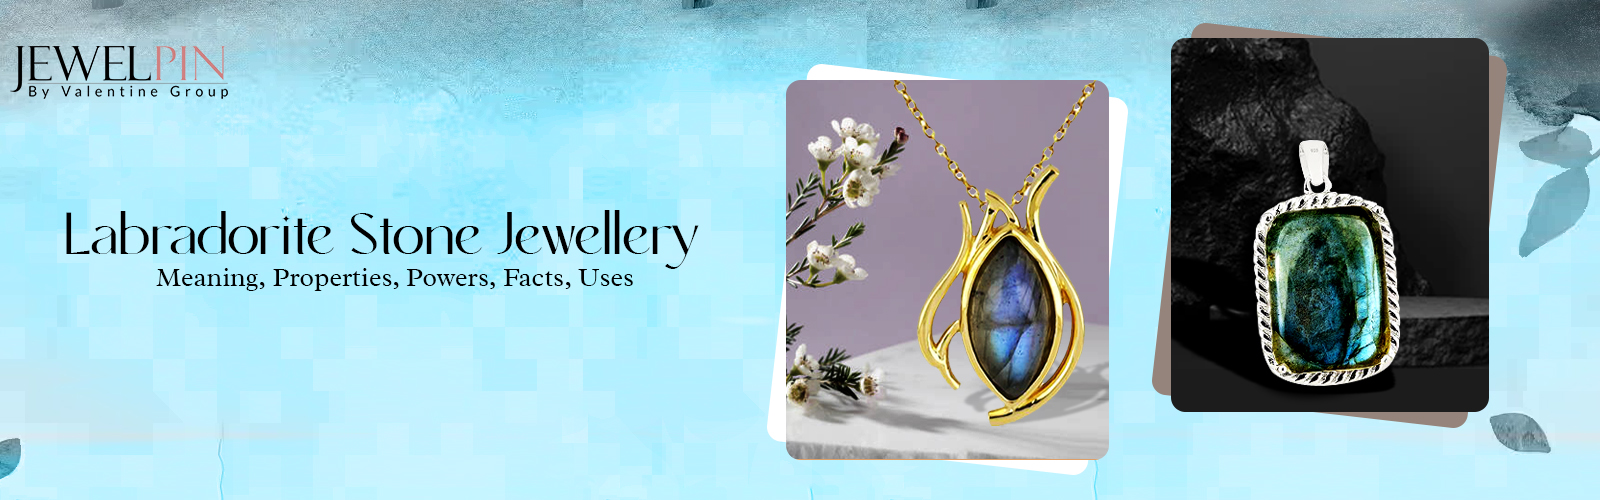 labradorite stone jewellery meaning properties powers facts uses